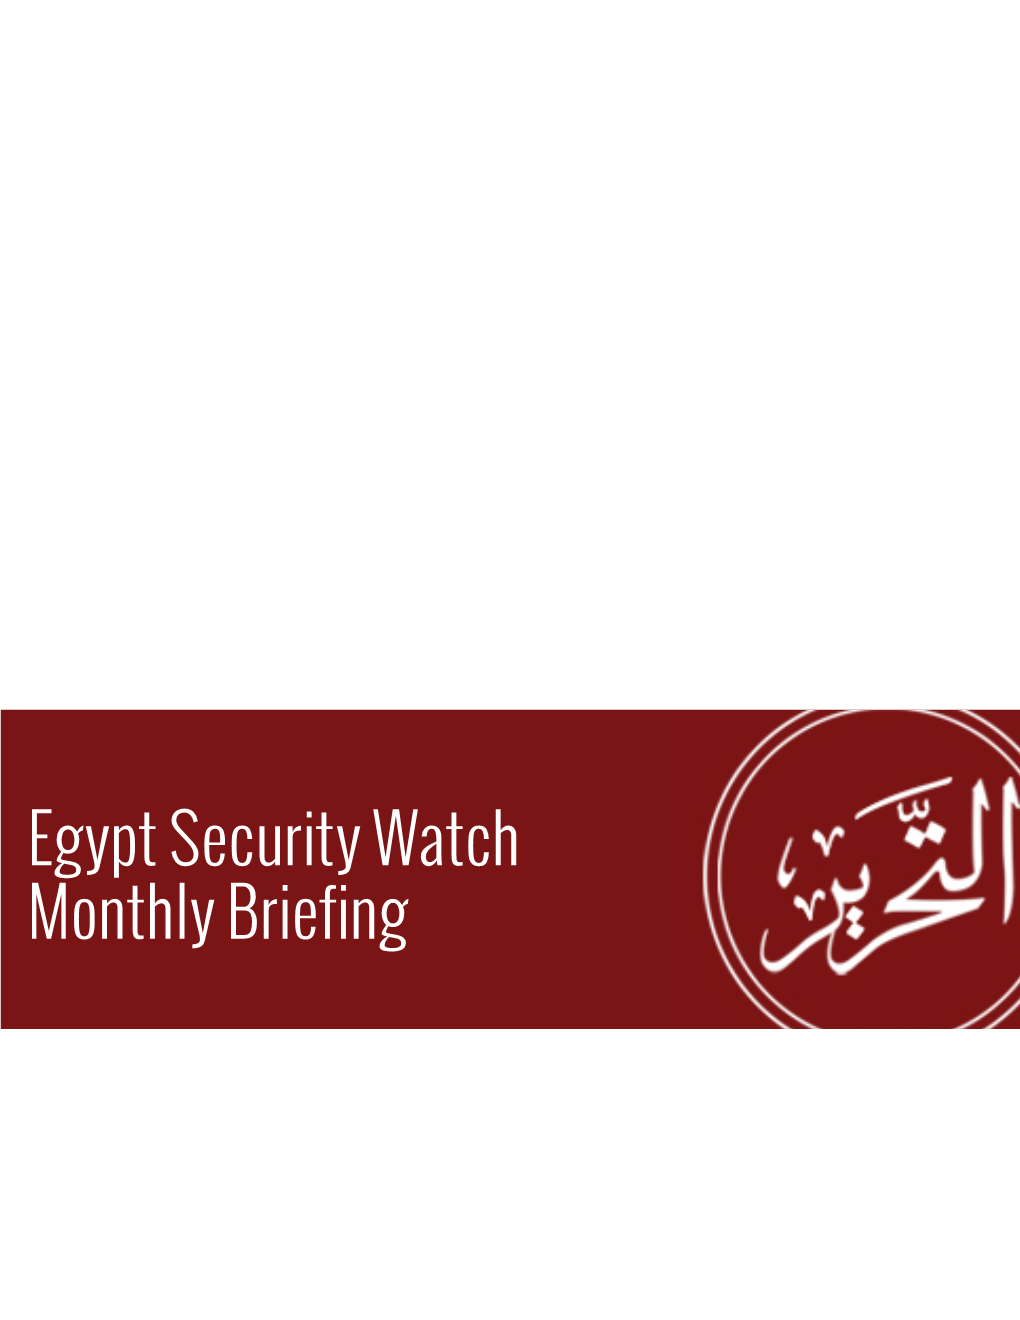 Egypt Security Watch Monthly Briefing Summary